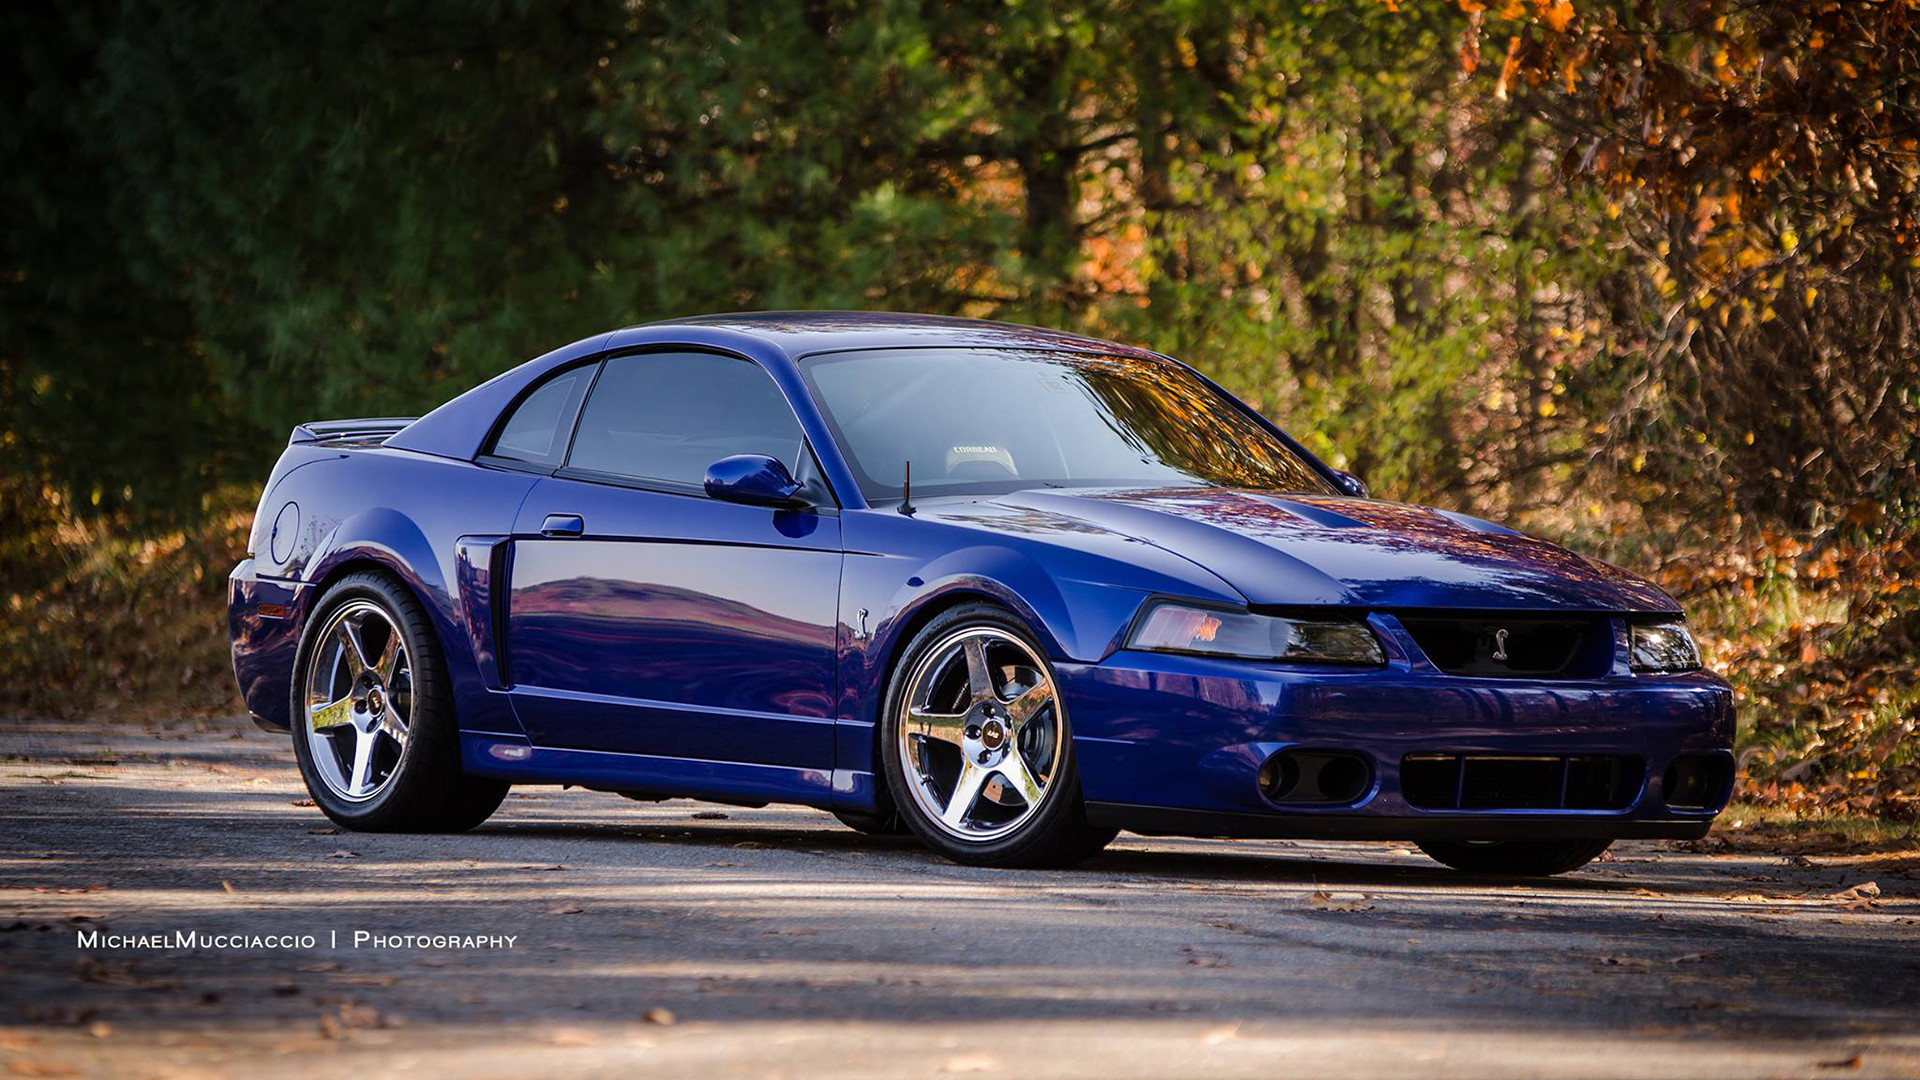 1920x1080 ... 2003-04 Mustang SVT Cobra with the Terminator engine | The Word of .